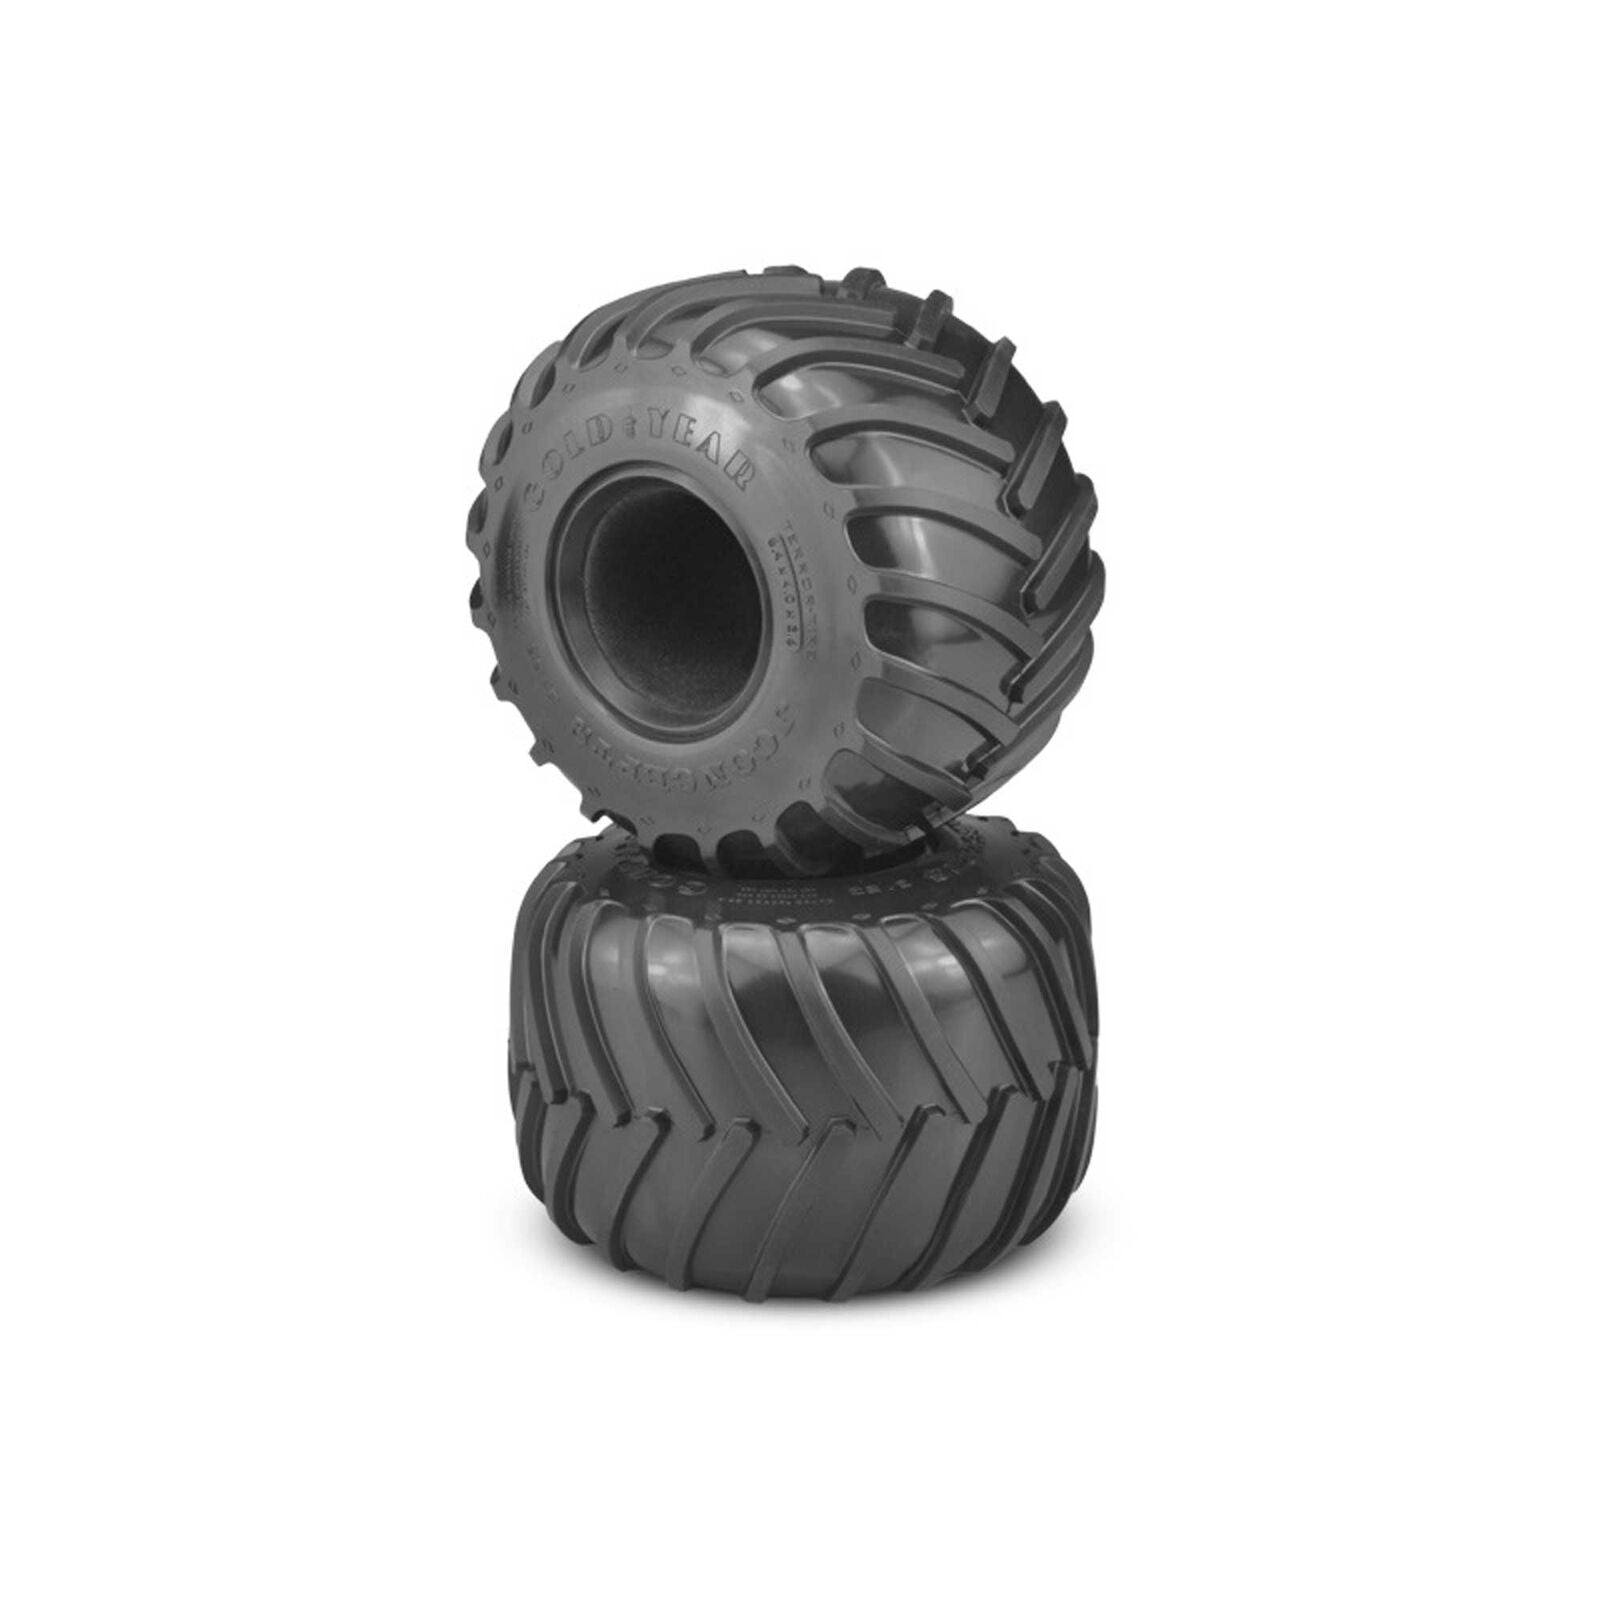 JCONCEPTS 3183-01 Golden Years Monster Truck Tire, Blue Compound